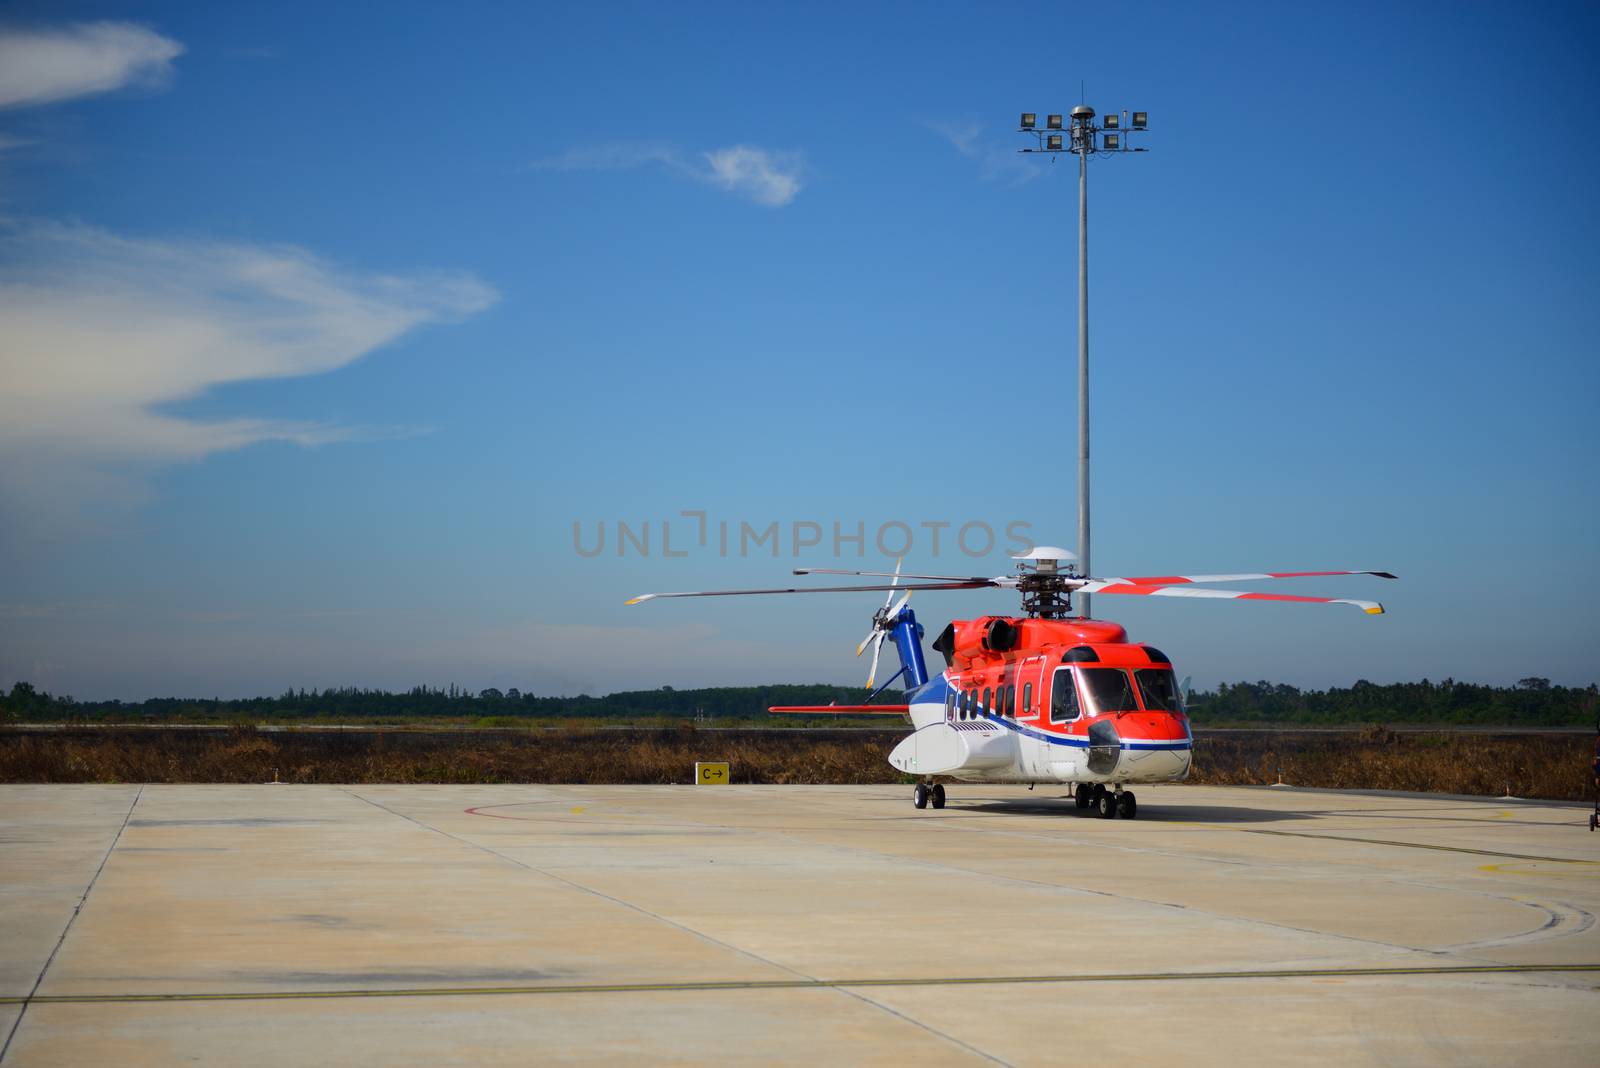 offshore helicopter park on the apron